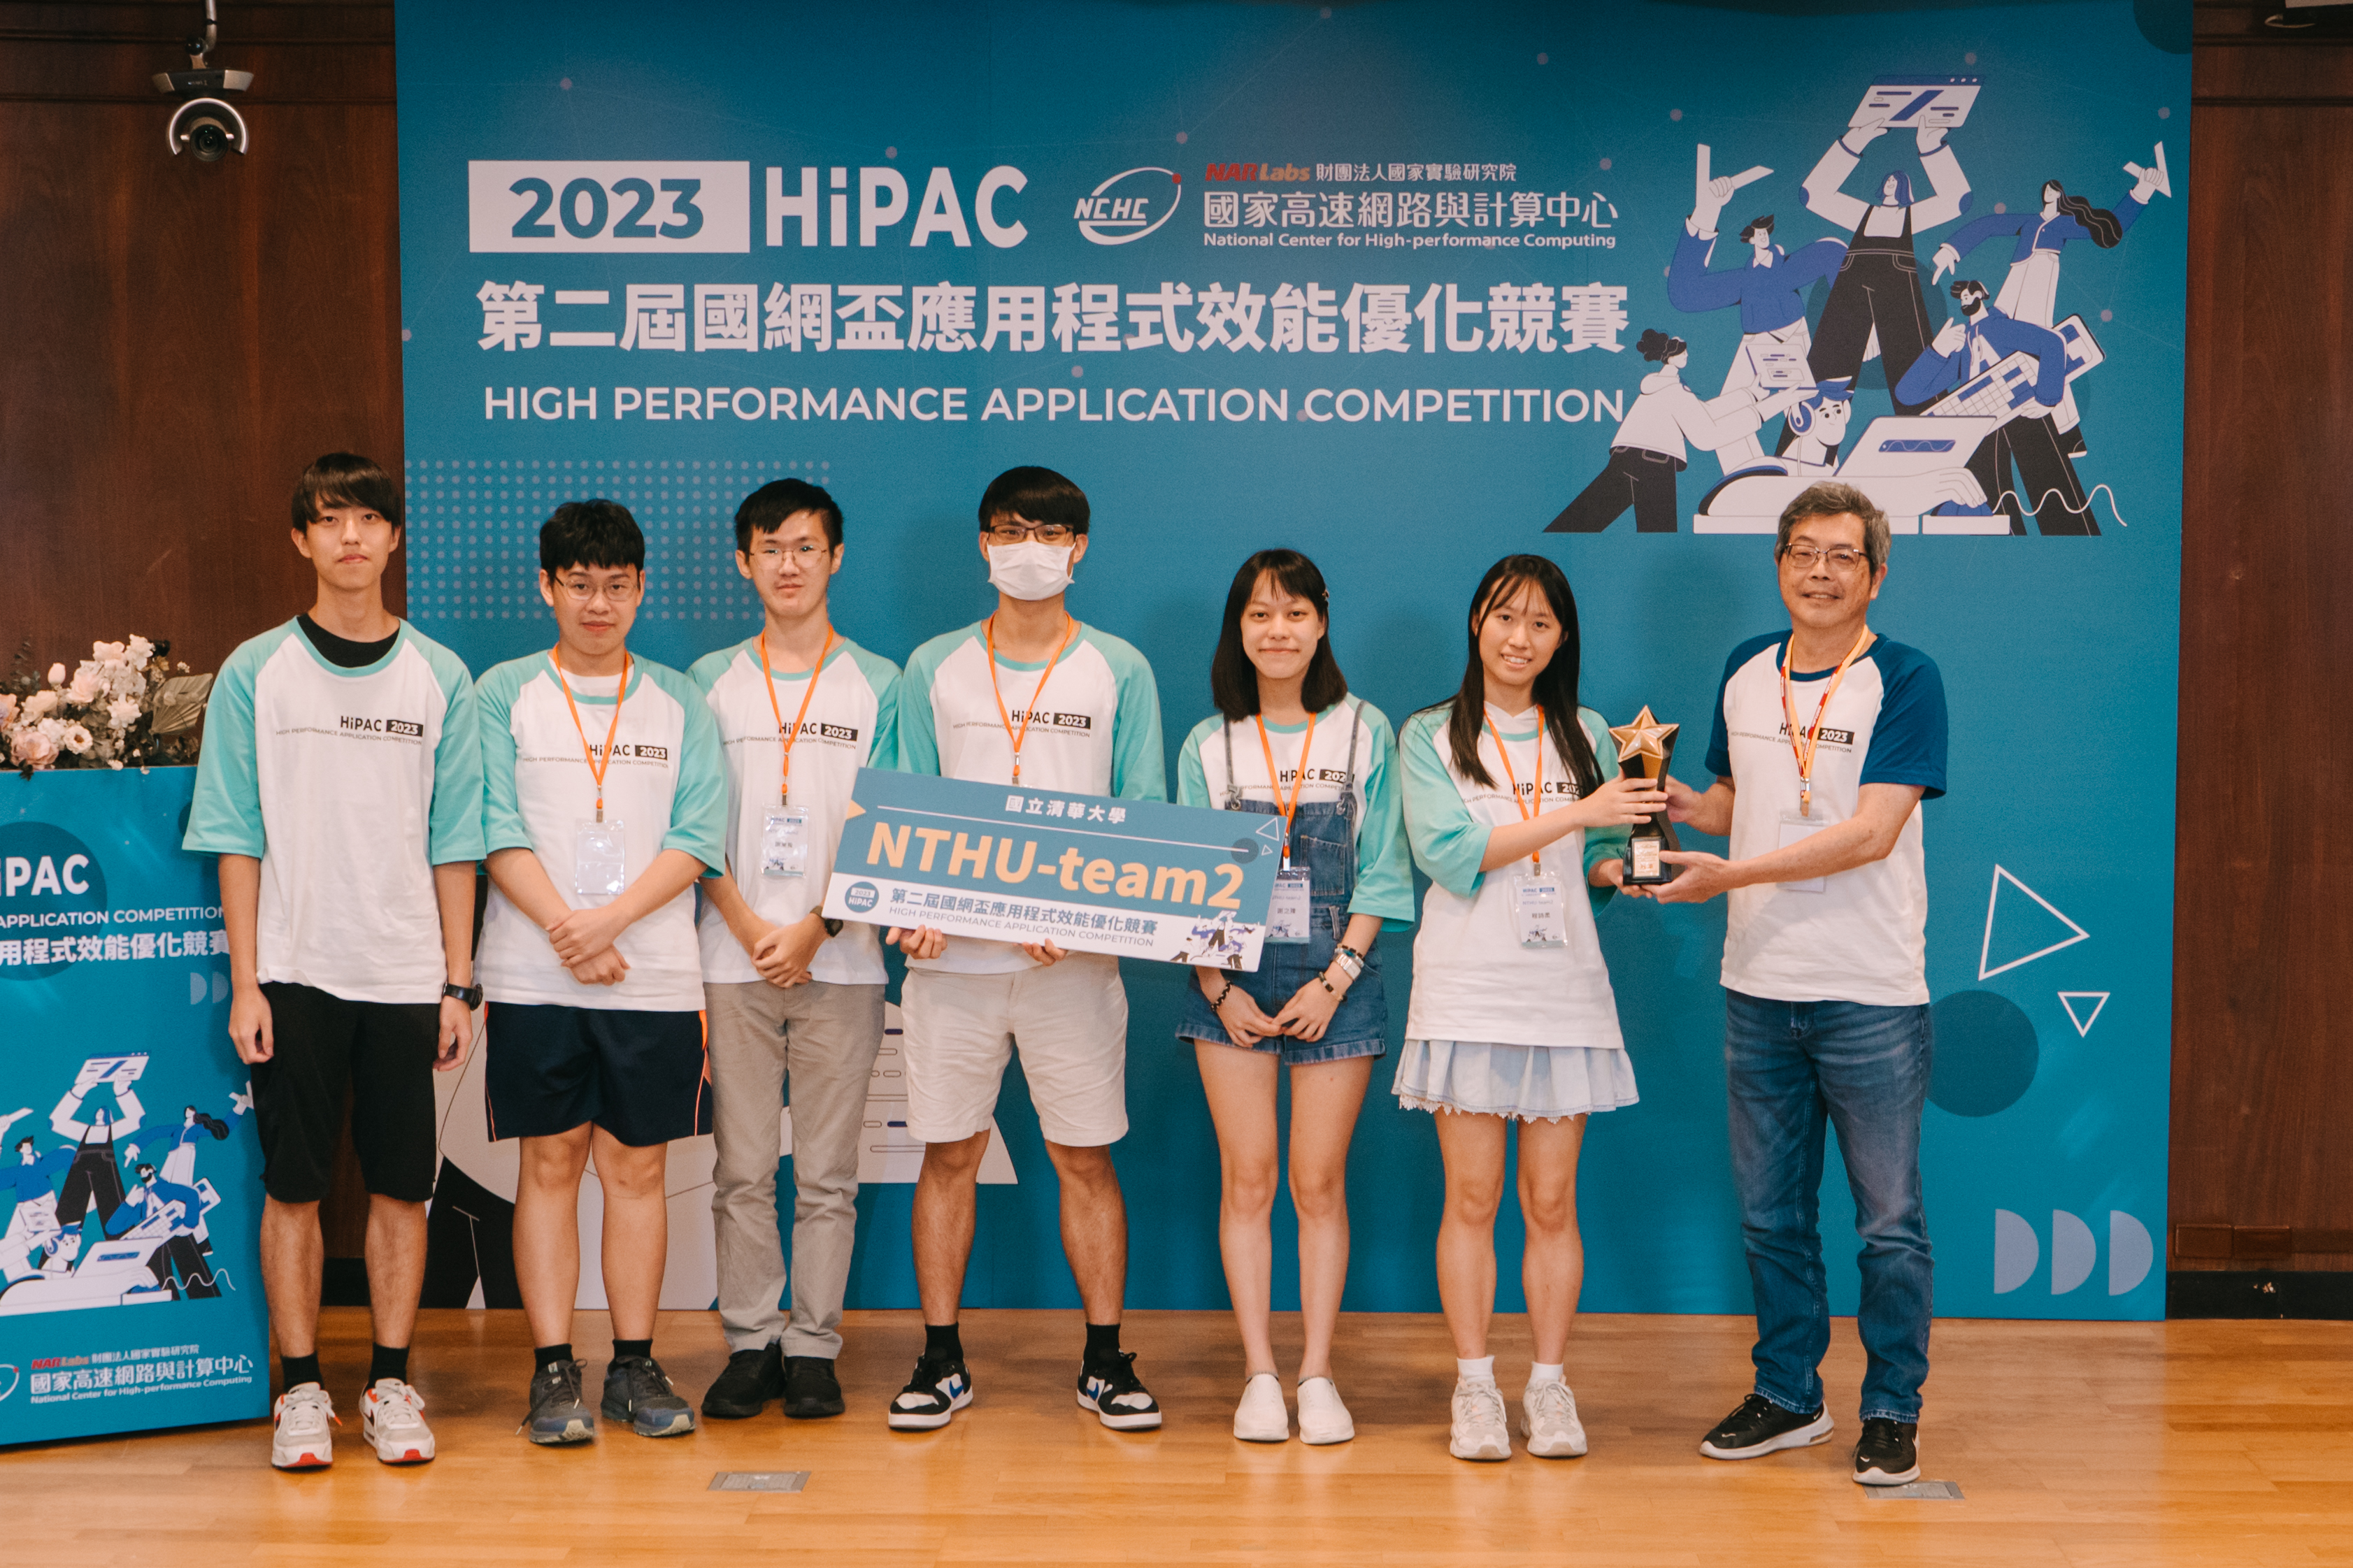 National Center for High-performance Computing Director General Chau-Lyan Chang awarded prizes to champions NTHU-team2 of Tsinghua University. 